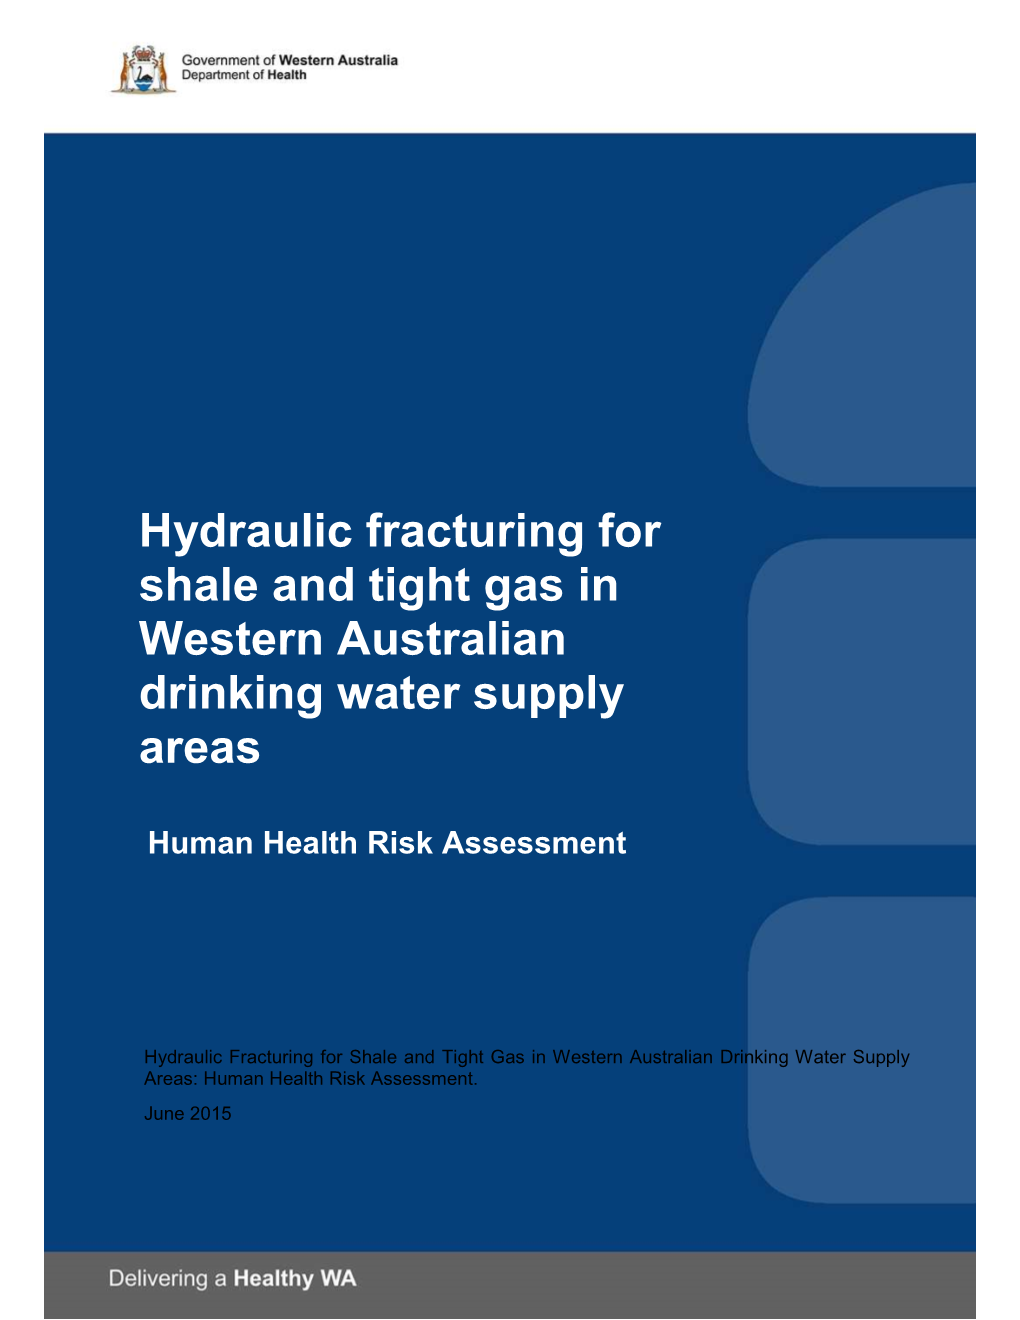 Hydraulic Fracturing for Shale and Tight Gas in Western Australian Drinking Water Supply Areas